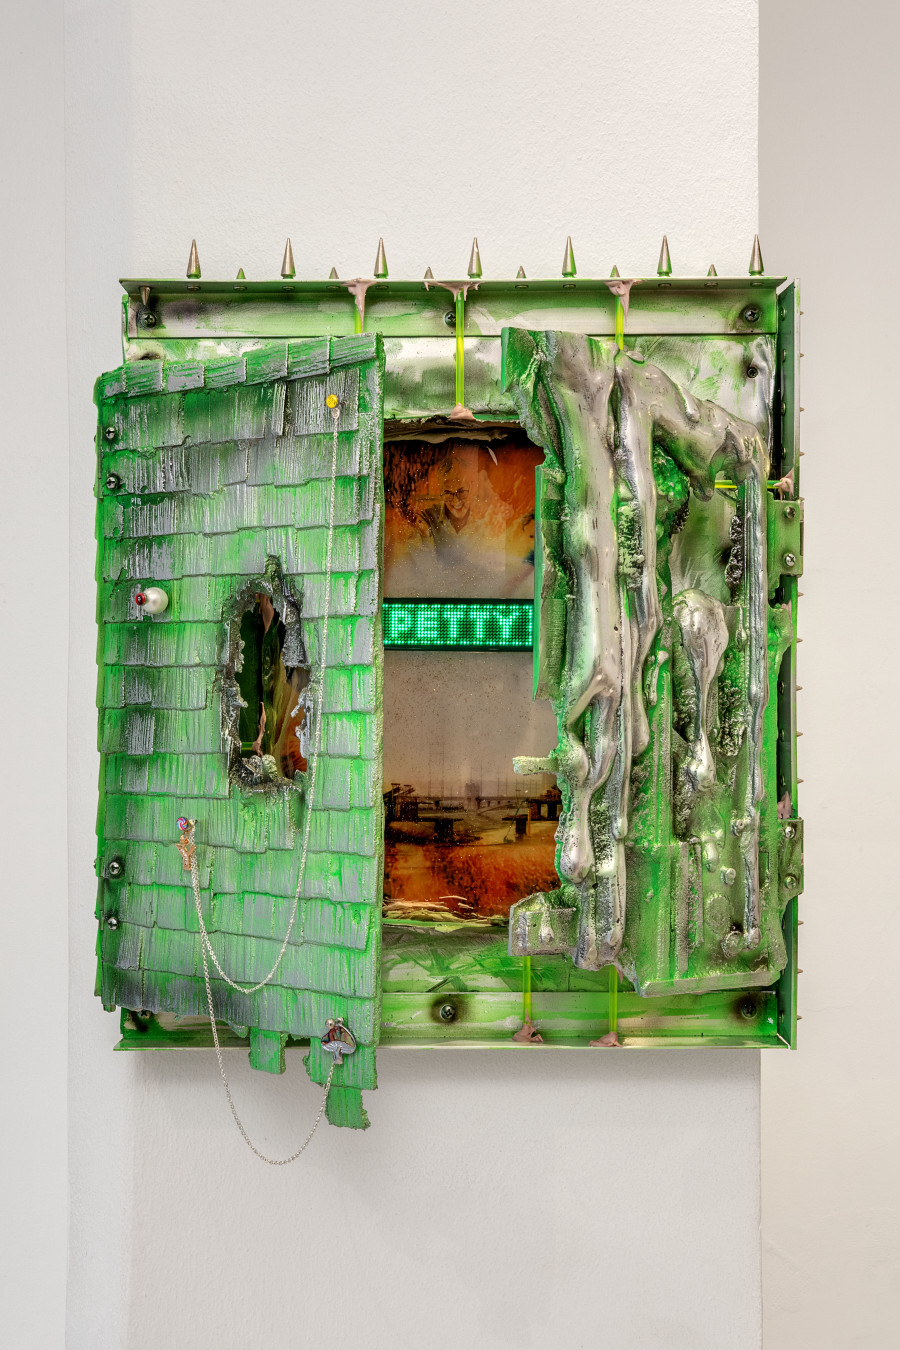 Mathis Altmann (*1987) Bridging Commerce III, 2019 Polished aluminum, airbrushed, inkjet print, LED name badge, resin, acrylic, vinyl spackling, studs, tongue piercings, silver chains, charms 41 x 36 x 8 cm (16.14 x 14.17 x 3.15 in)